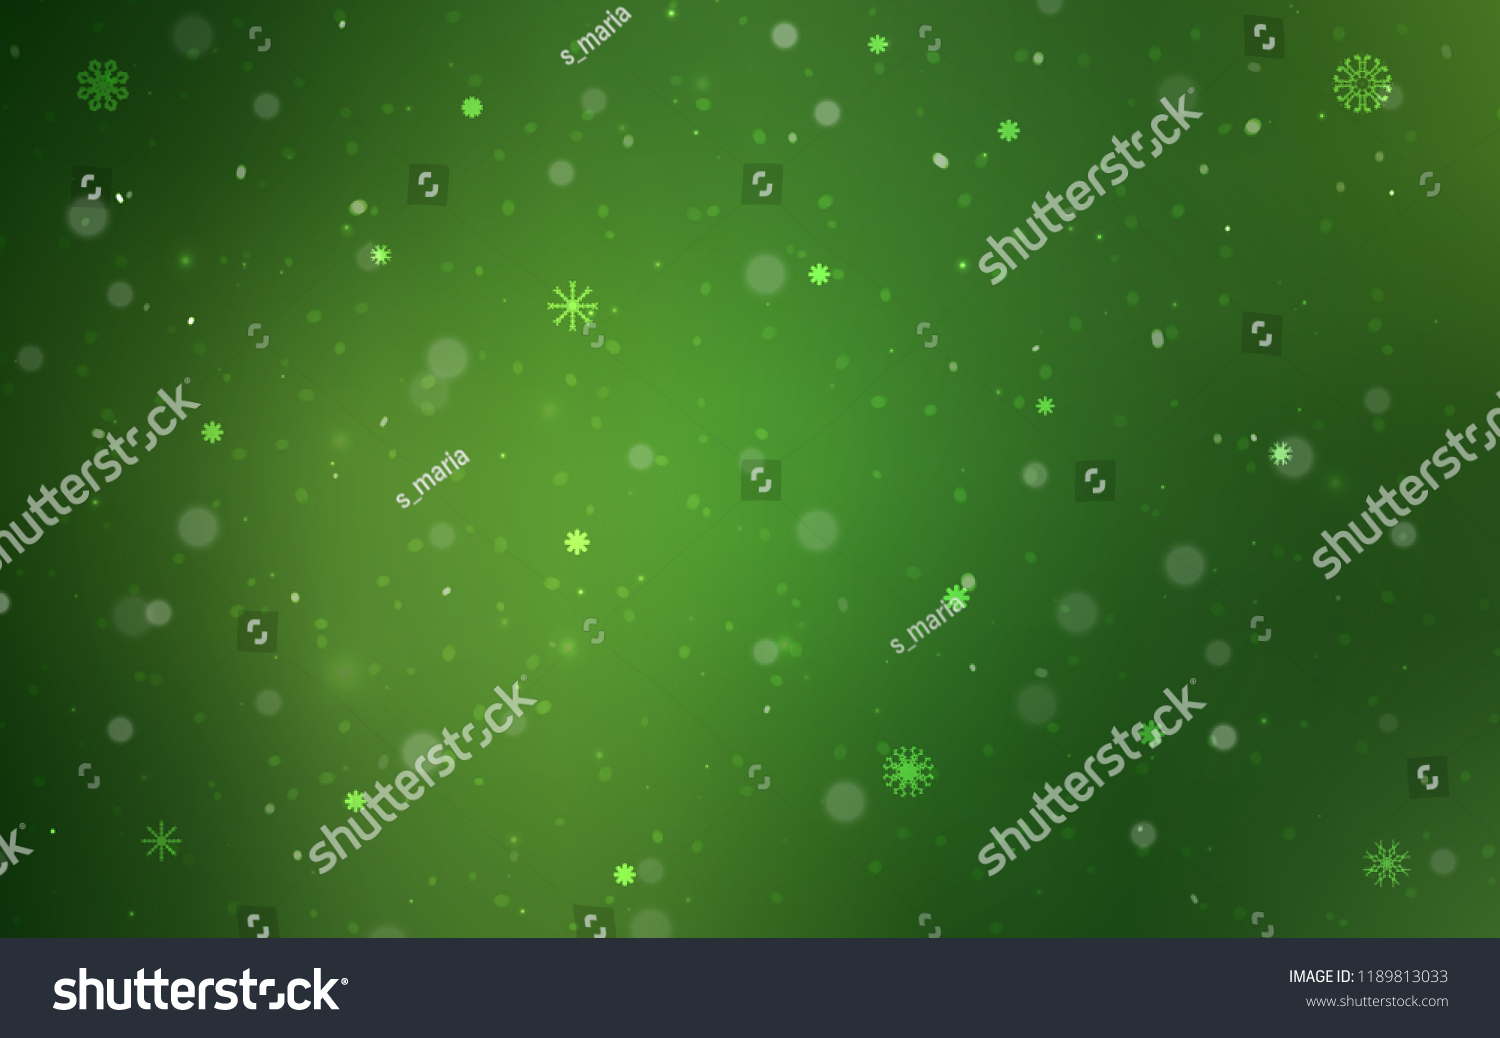 stock-vector-dark-green-vector-template-with-ice-snowflakes-modern-geometrical-abstract-illustration-with-1189813033